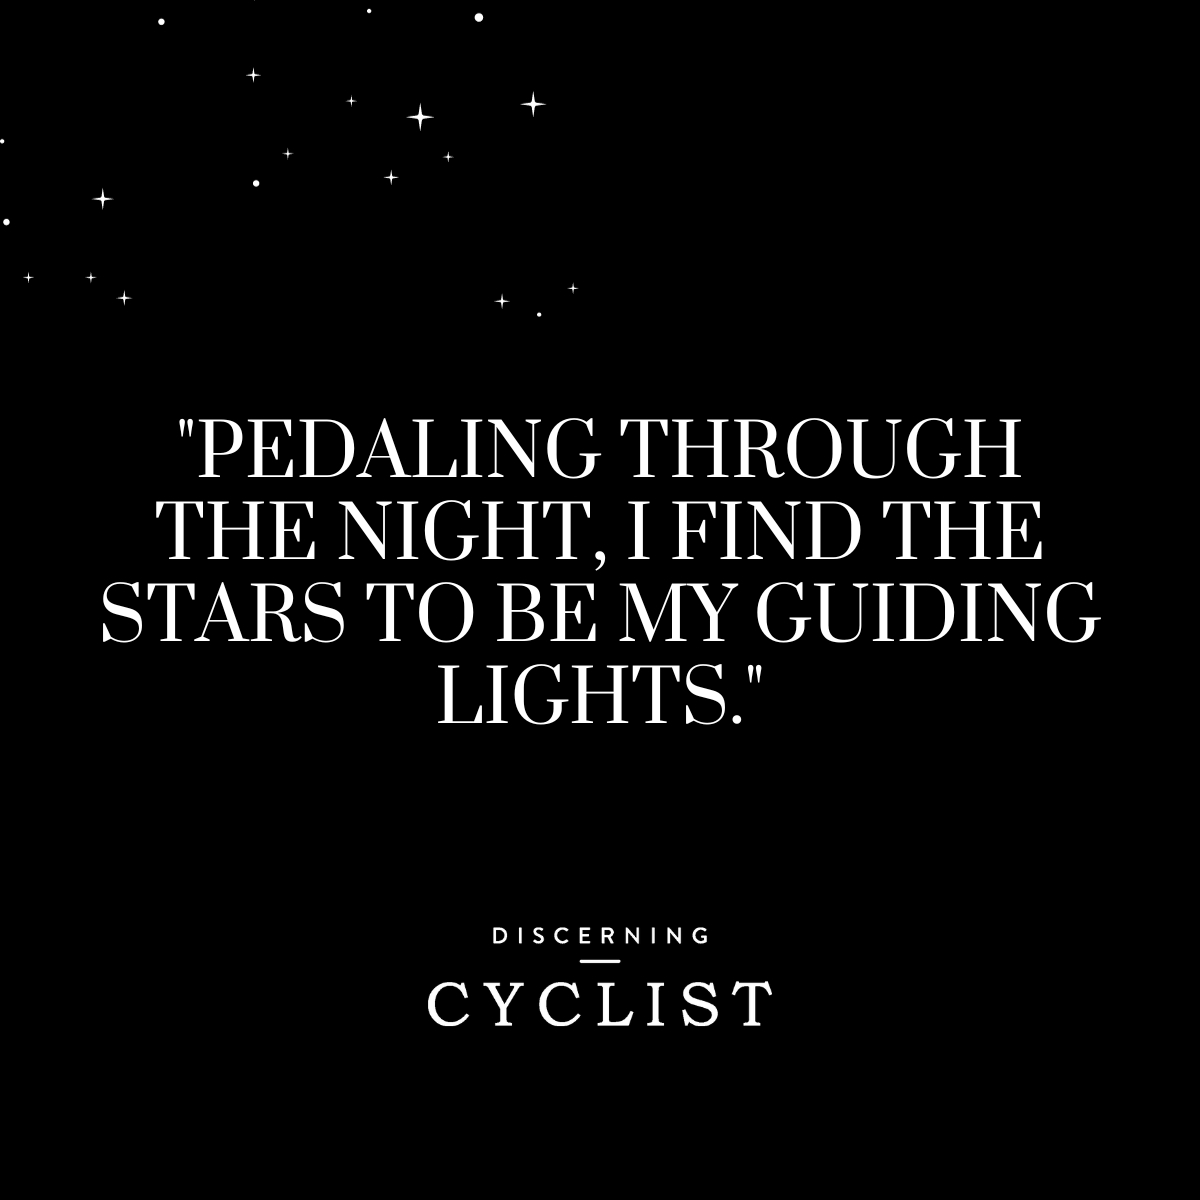 "Pedaling through the night, I find the stars to be my guiding lights."